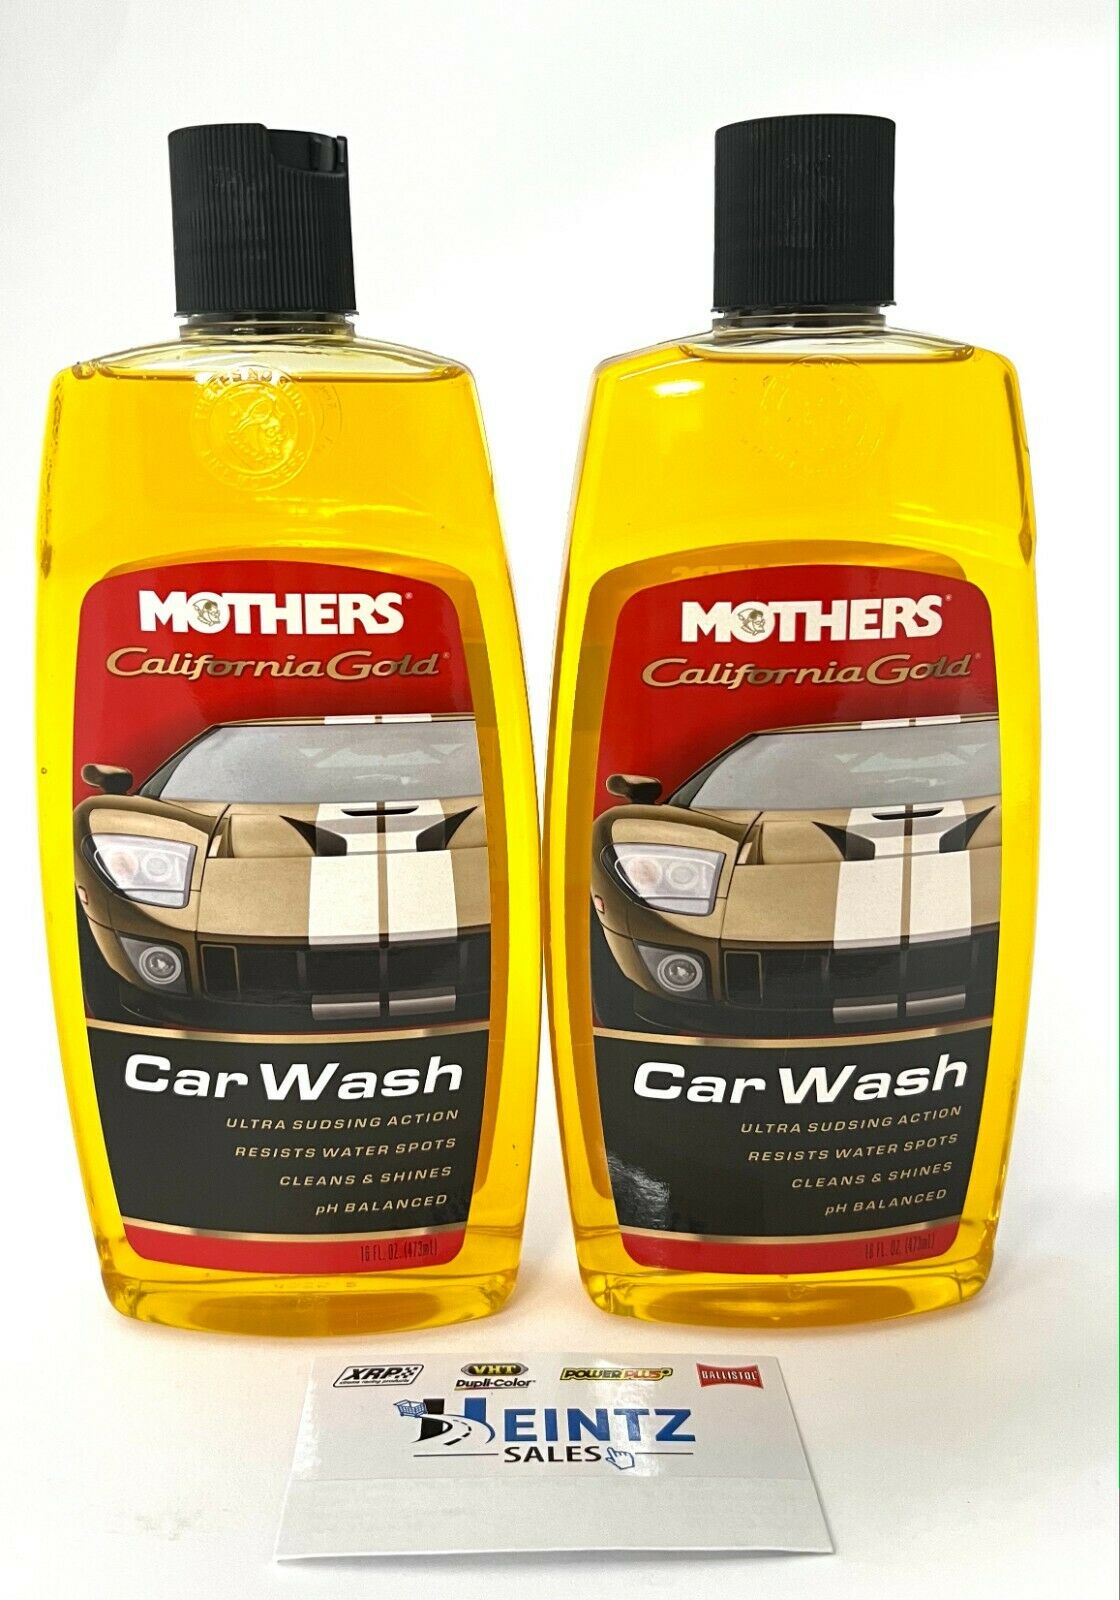 MOTHERS 05600 California Gold Car Wash 2 PACK - Resists water spots - 16 oz.